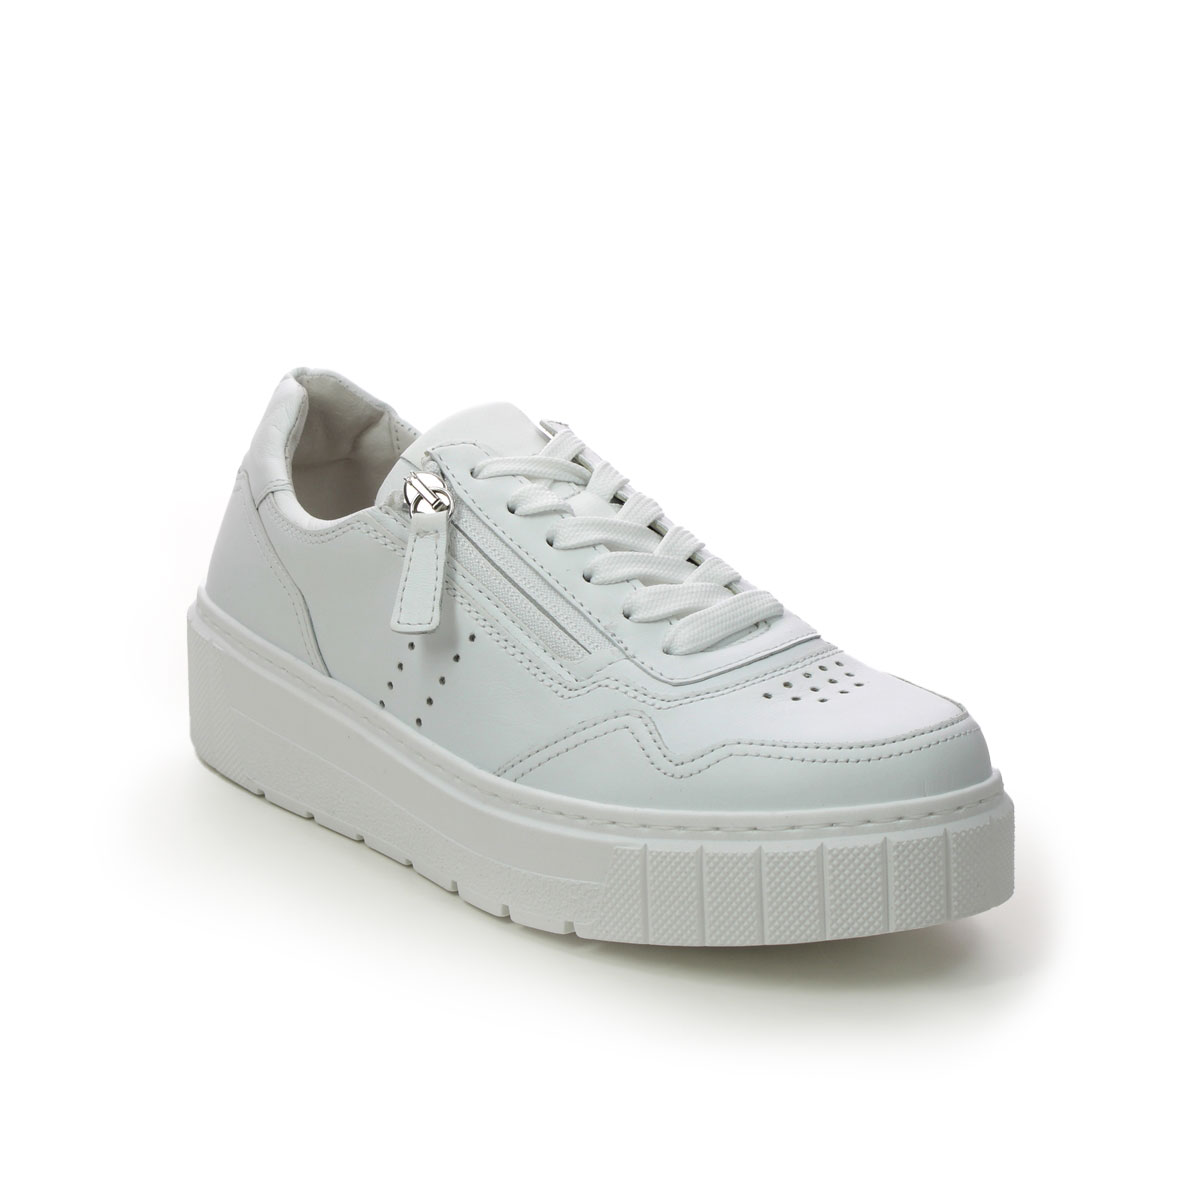 Gabor Farica Zip White Leather Womens Trainers 26.418.50 In Size 7 In Plain White Leather  Womens Trainers In Soft White Leather Leather